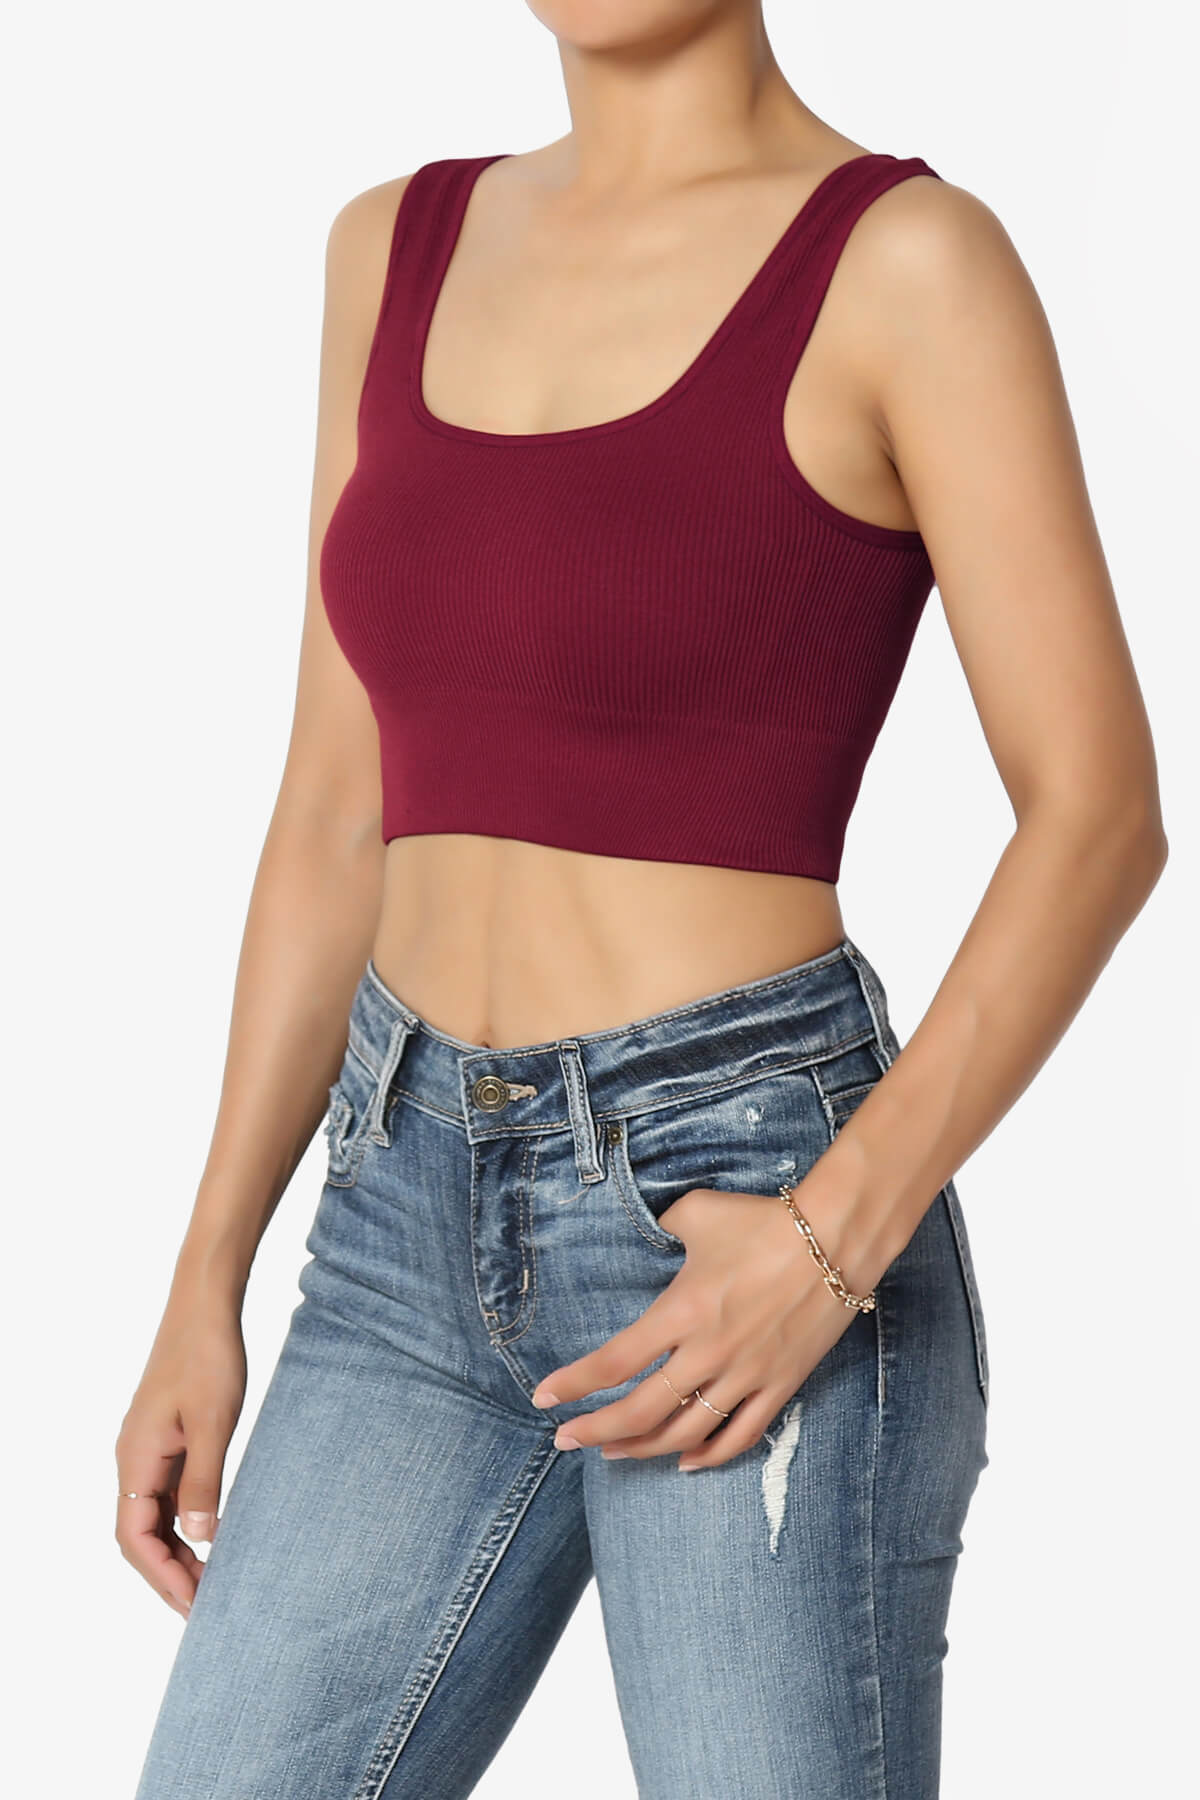 Women's Slim Fit Ribbed High Neck Tank Top - A New Day™ Burgundy L